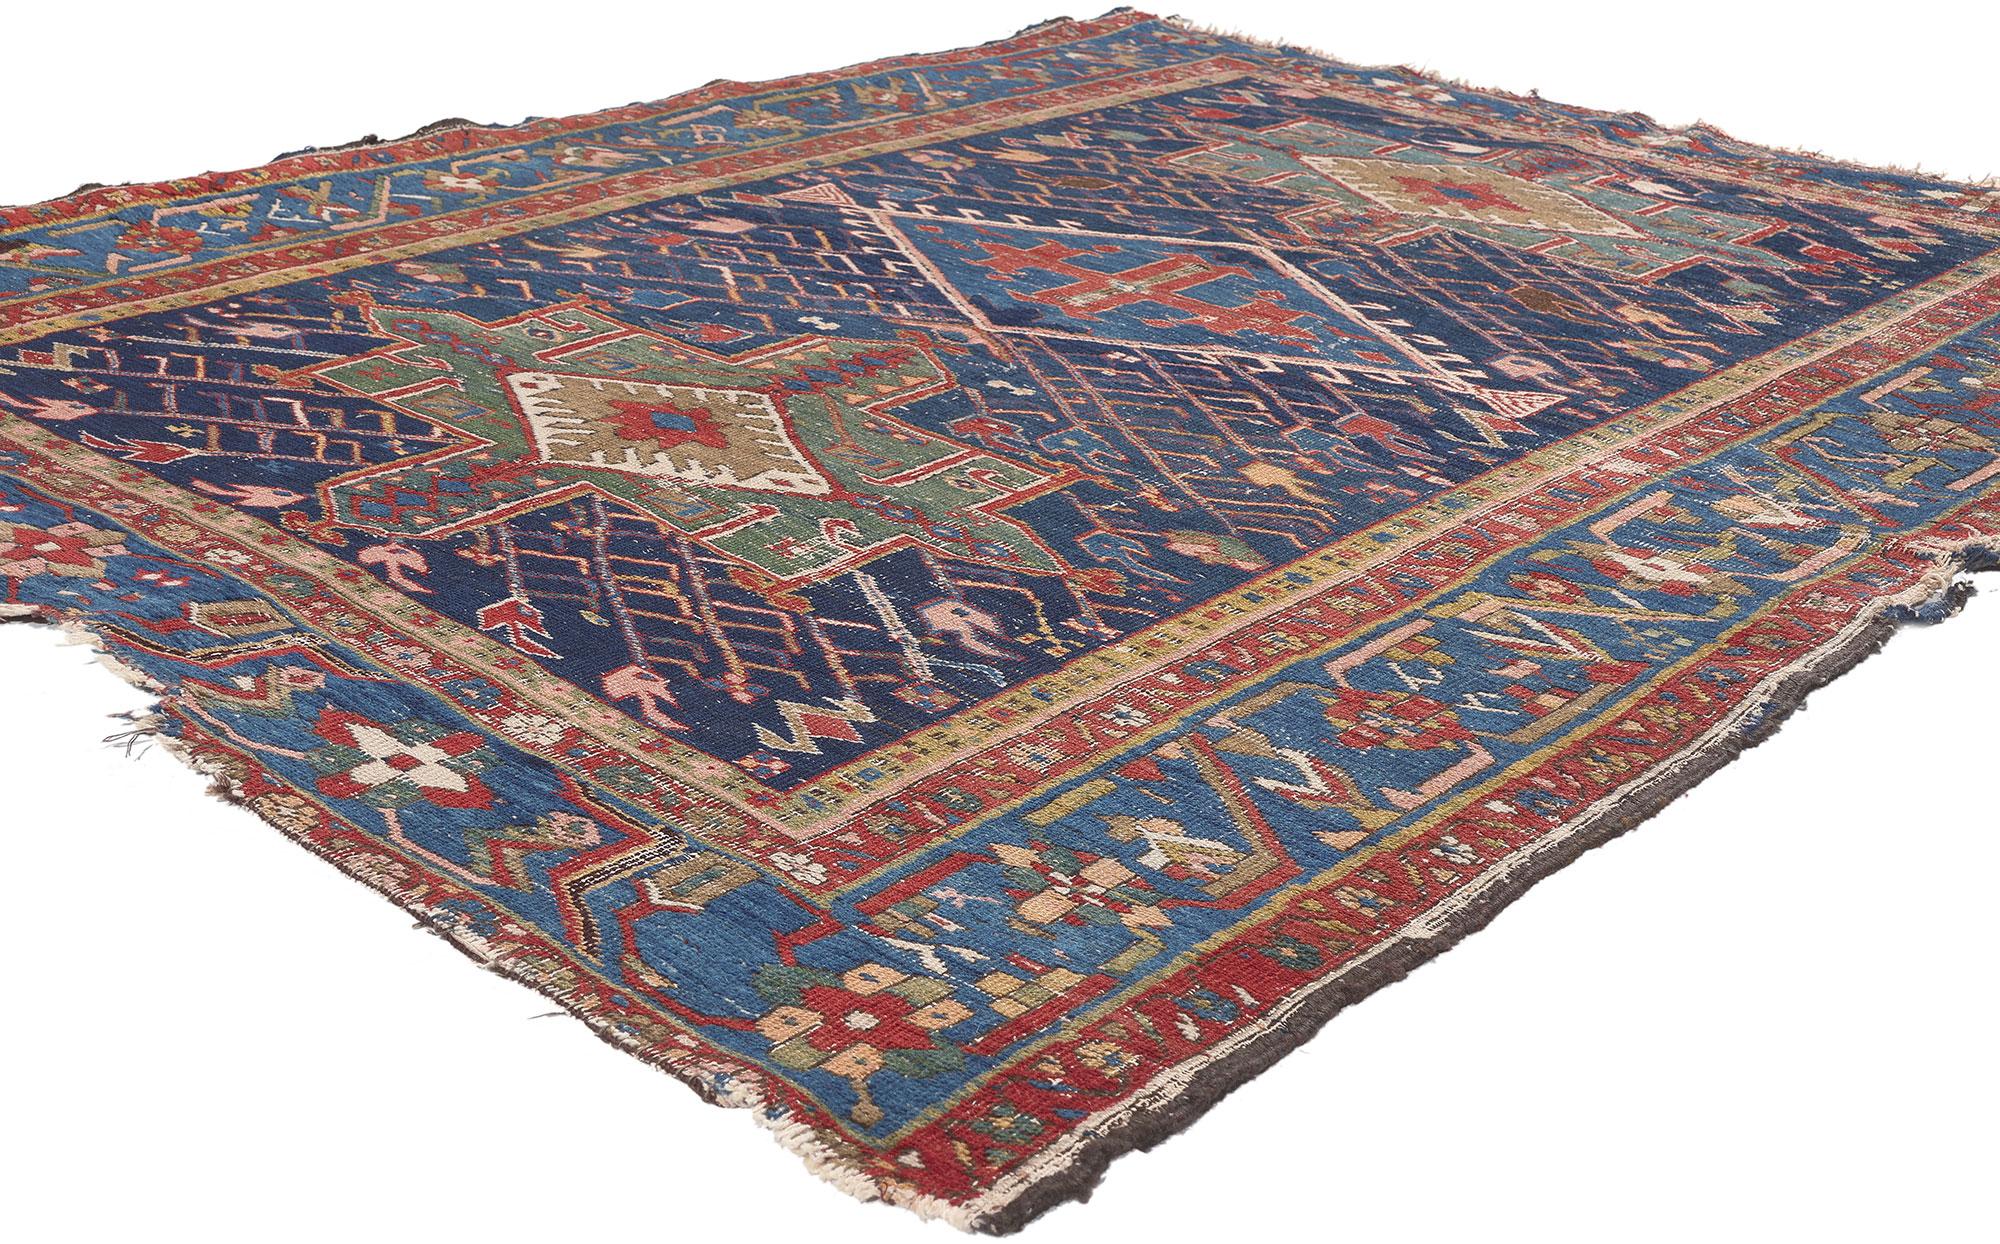 78541 Disressed Antique Persian Serapi Rug, 05'00 x 06'01.
Rugged beauty meets modern masculine in this weathered antique Persian Serapi rug. The Caucasus tribal design and antique worn colors woven into this piece work together creating a deeply